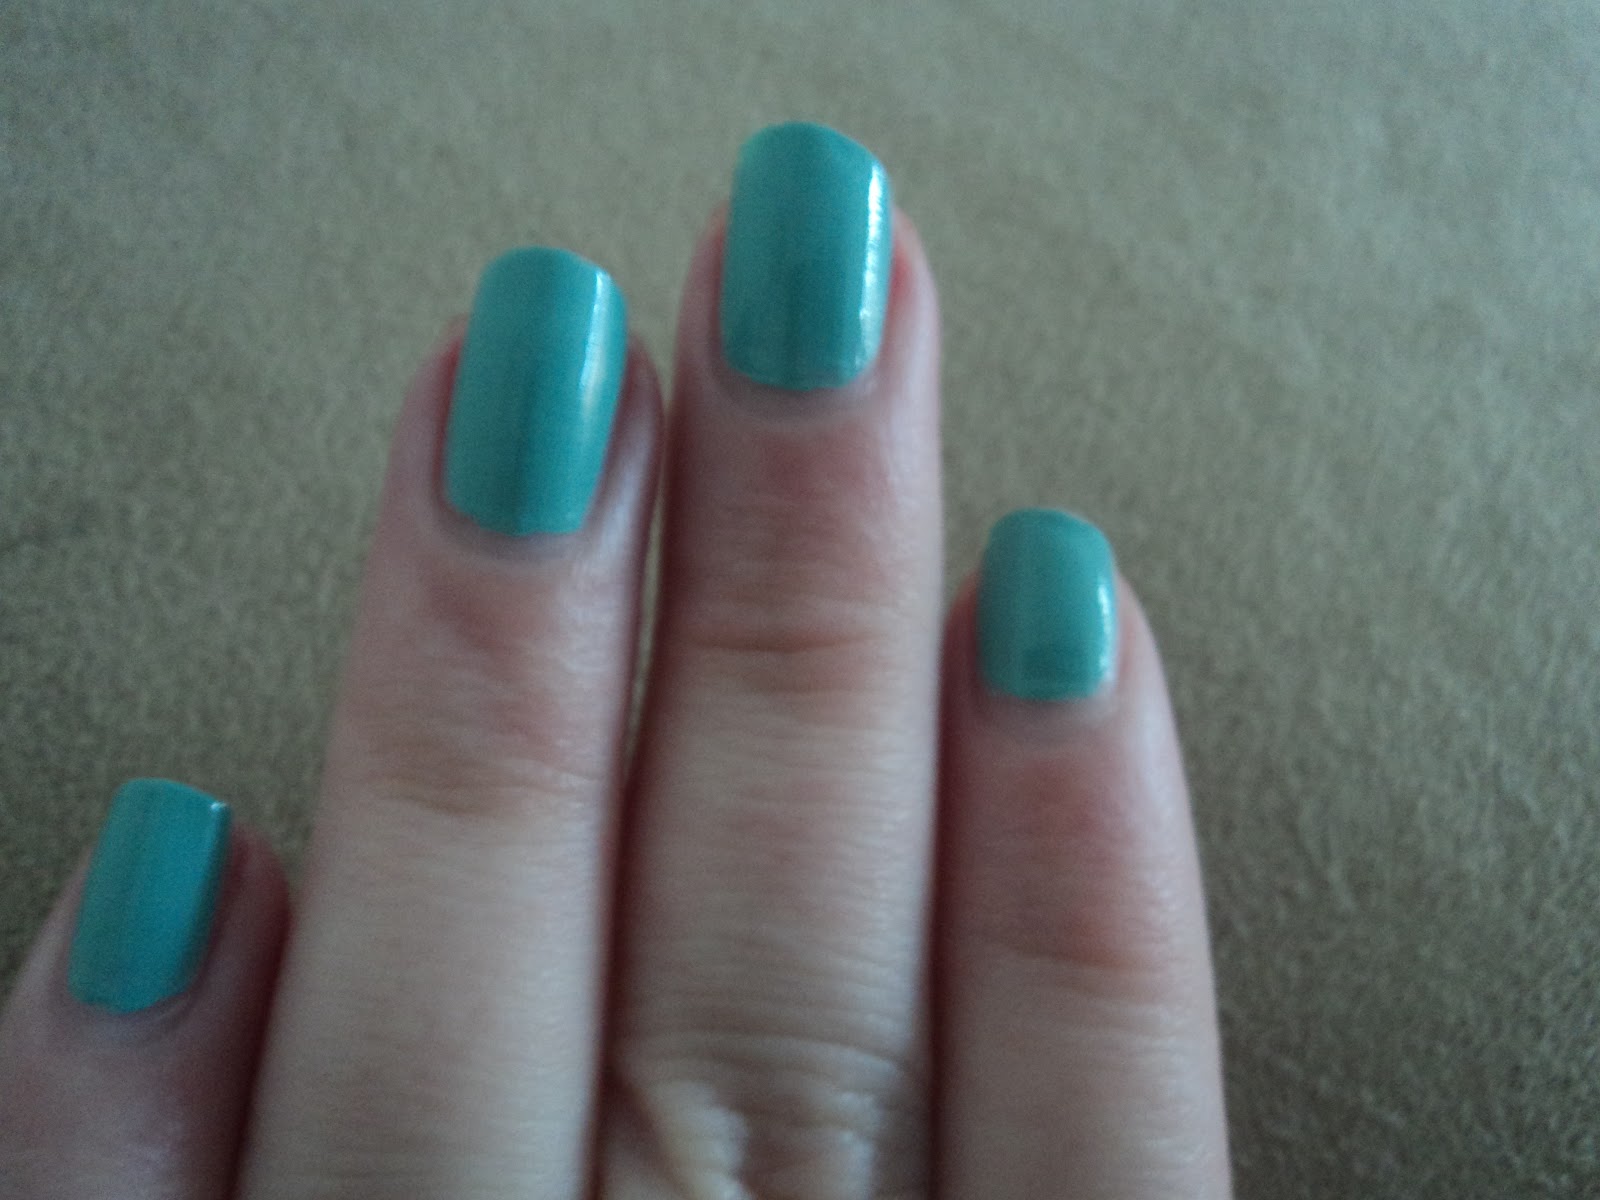 4. China Glaze Nail Lacquer in "For Audrey" - wide 3